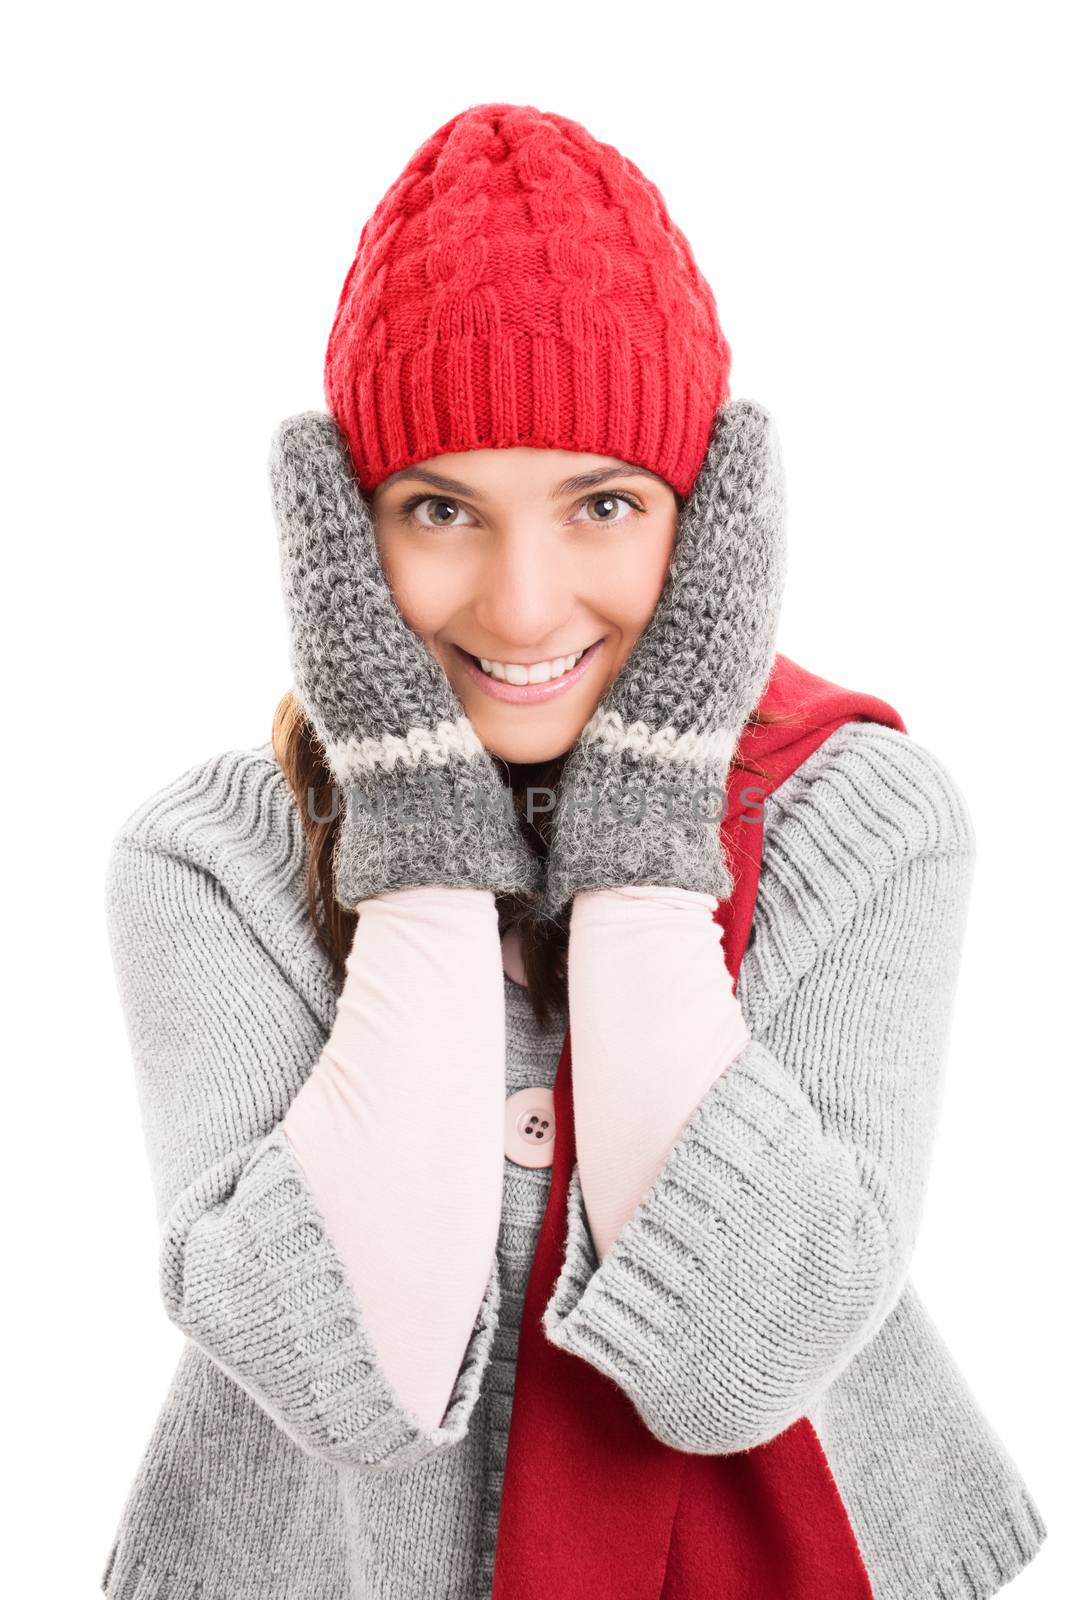 Portrait of a beautiful smiling young woman with warm winter clothes holding her cheeks, isolated on white background.